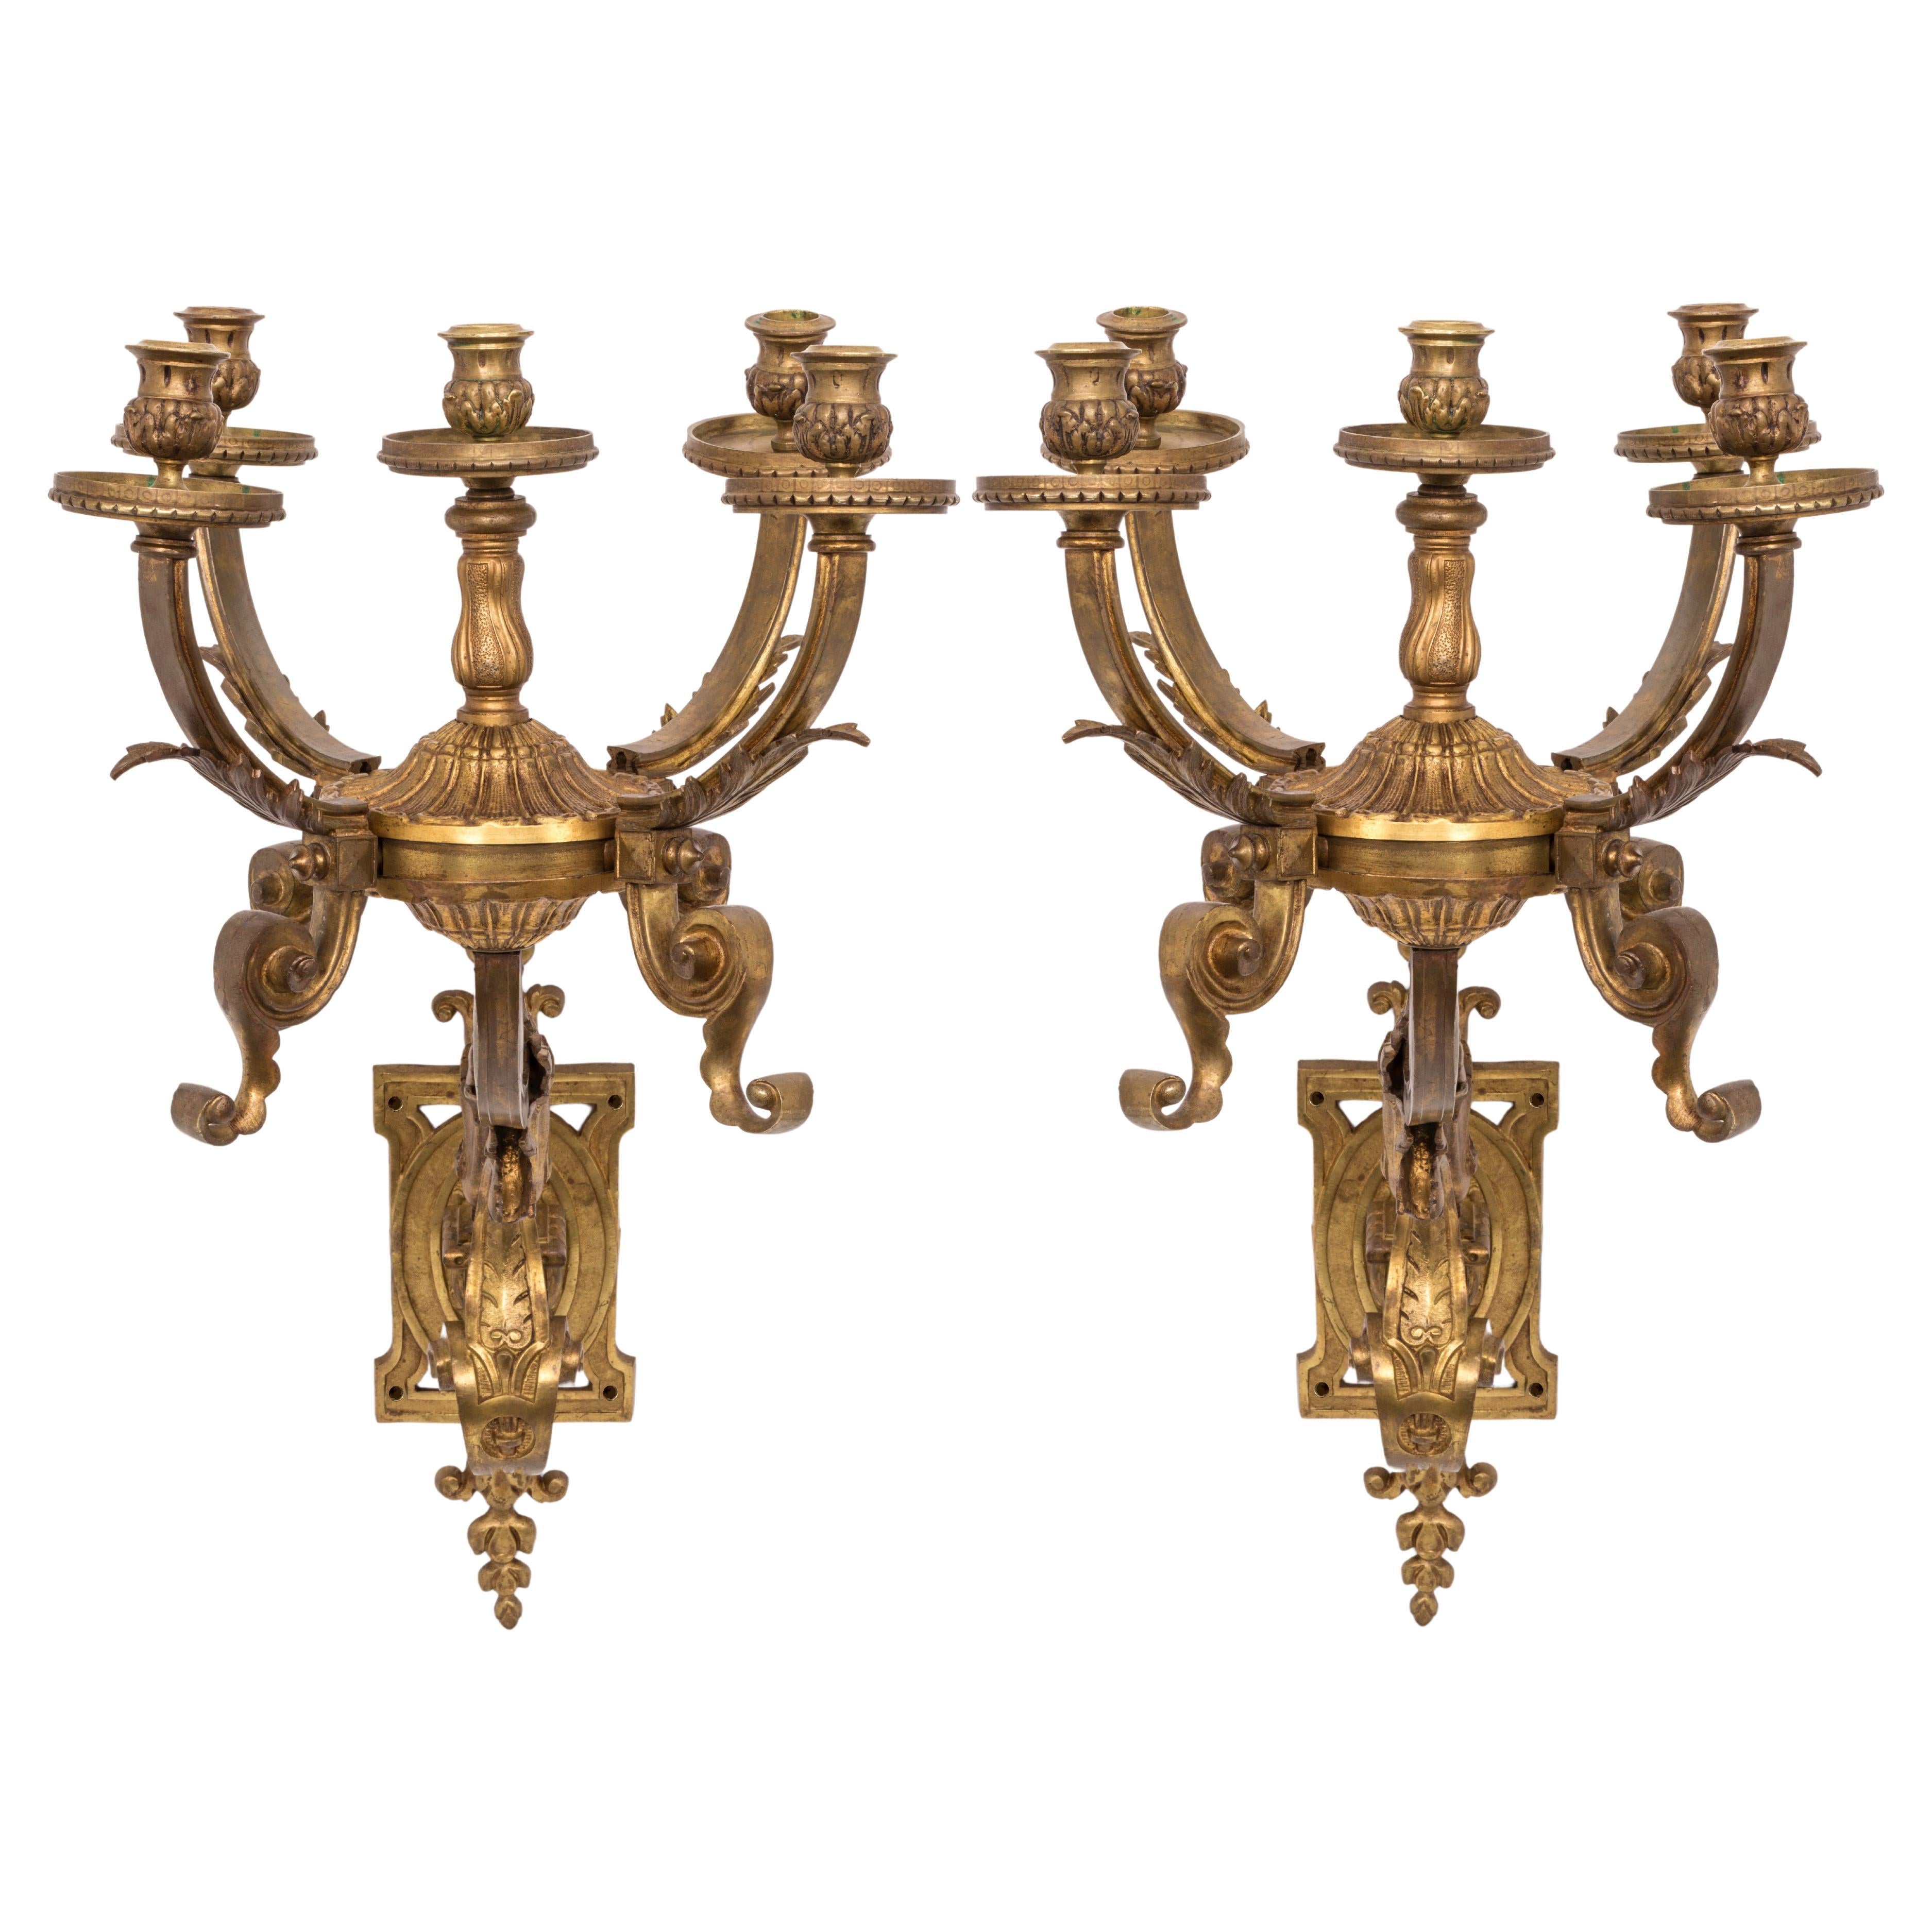 Large, Antique French Gilt Bronze Wall Sconces, Pair